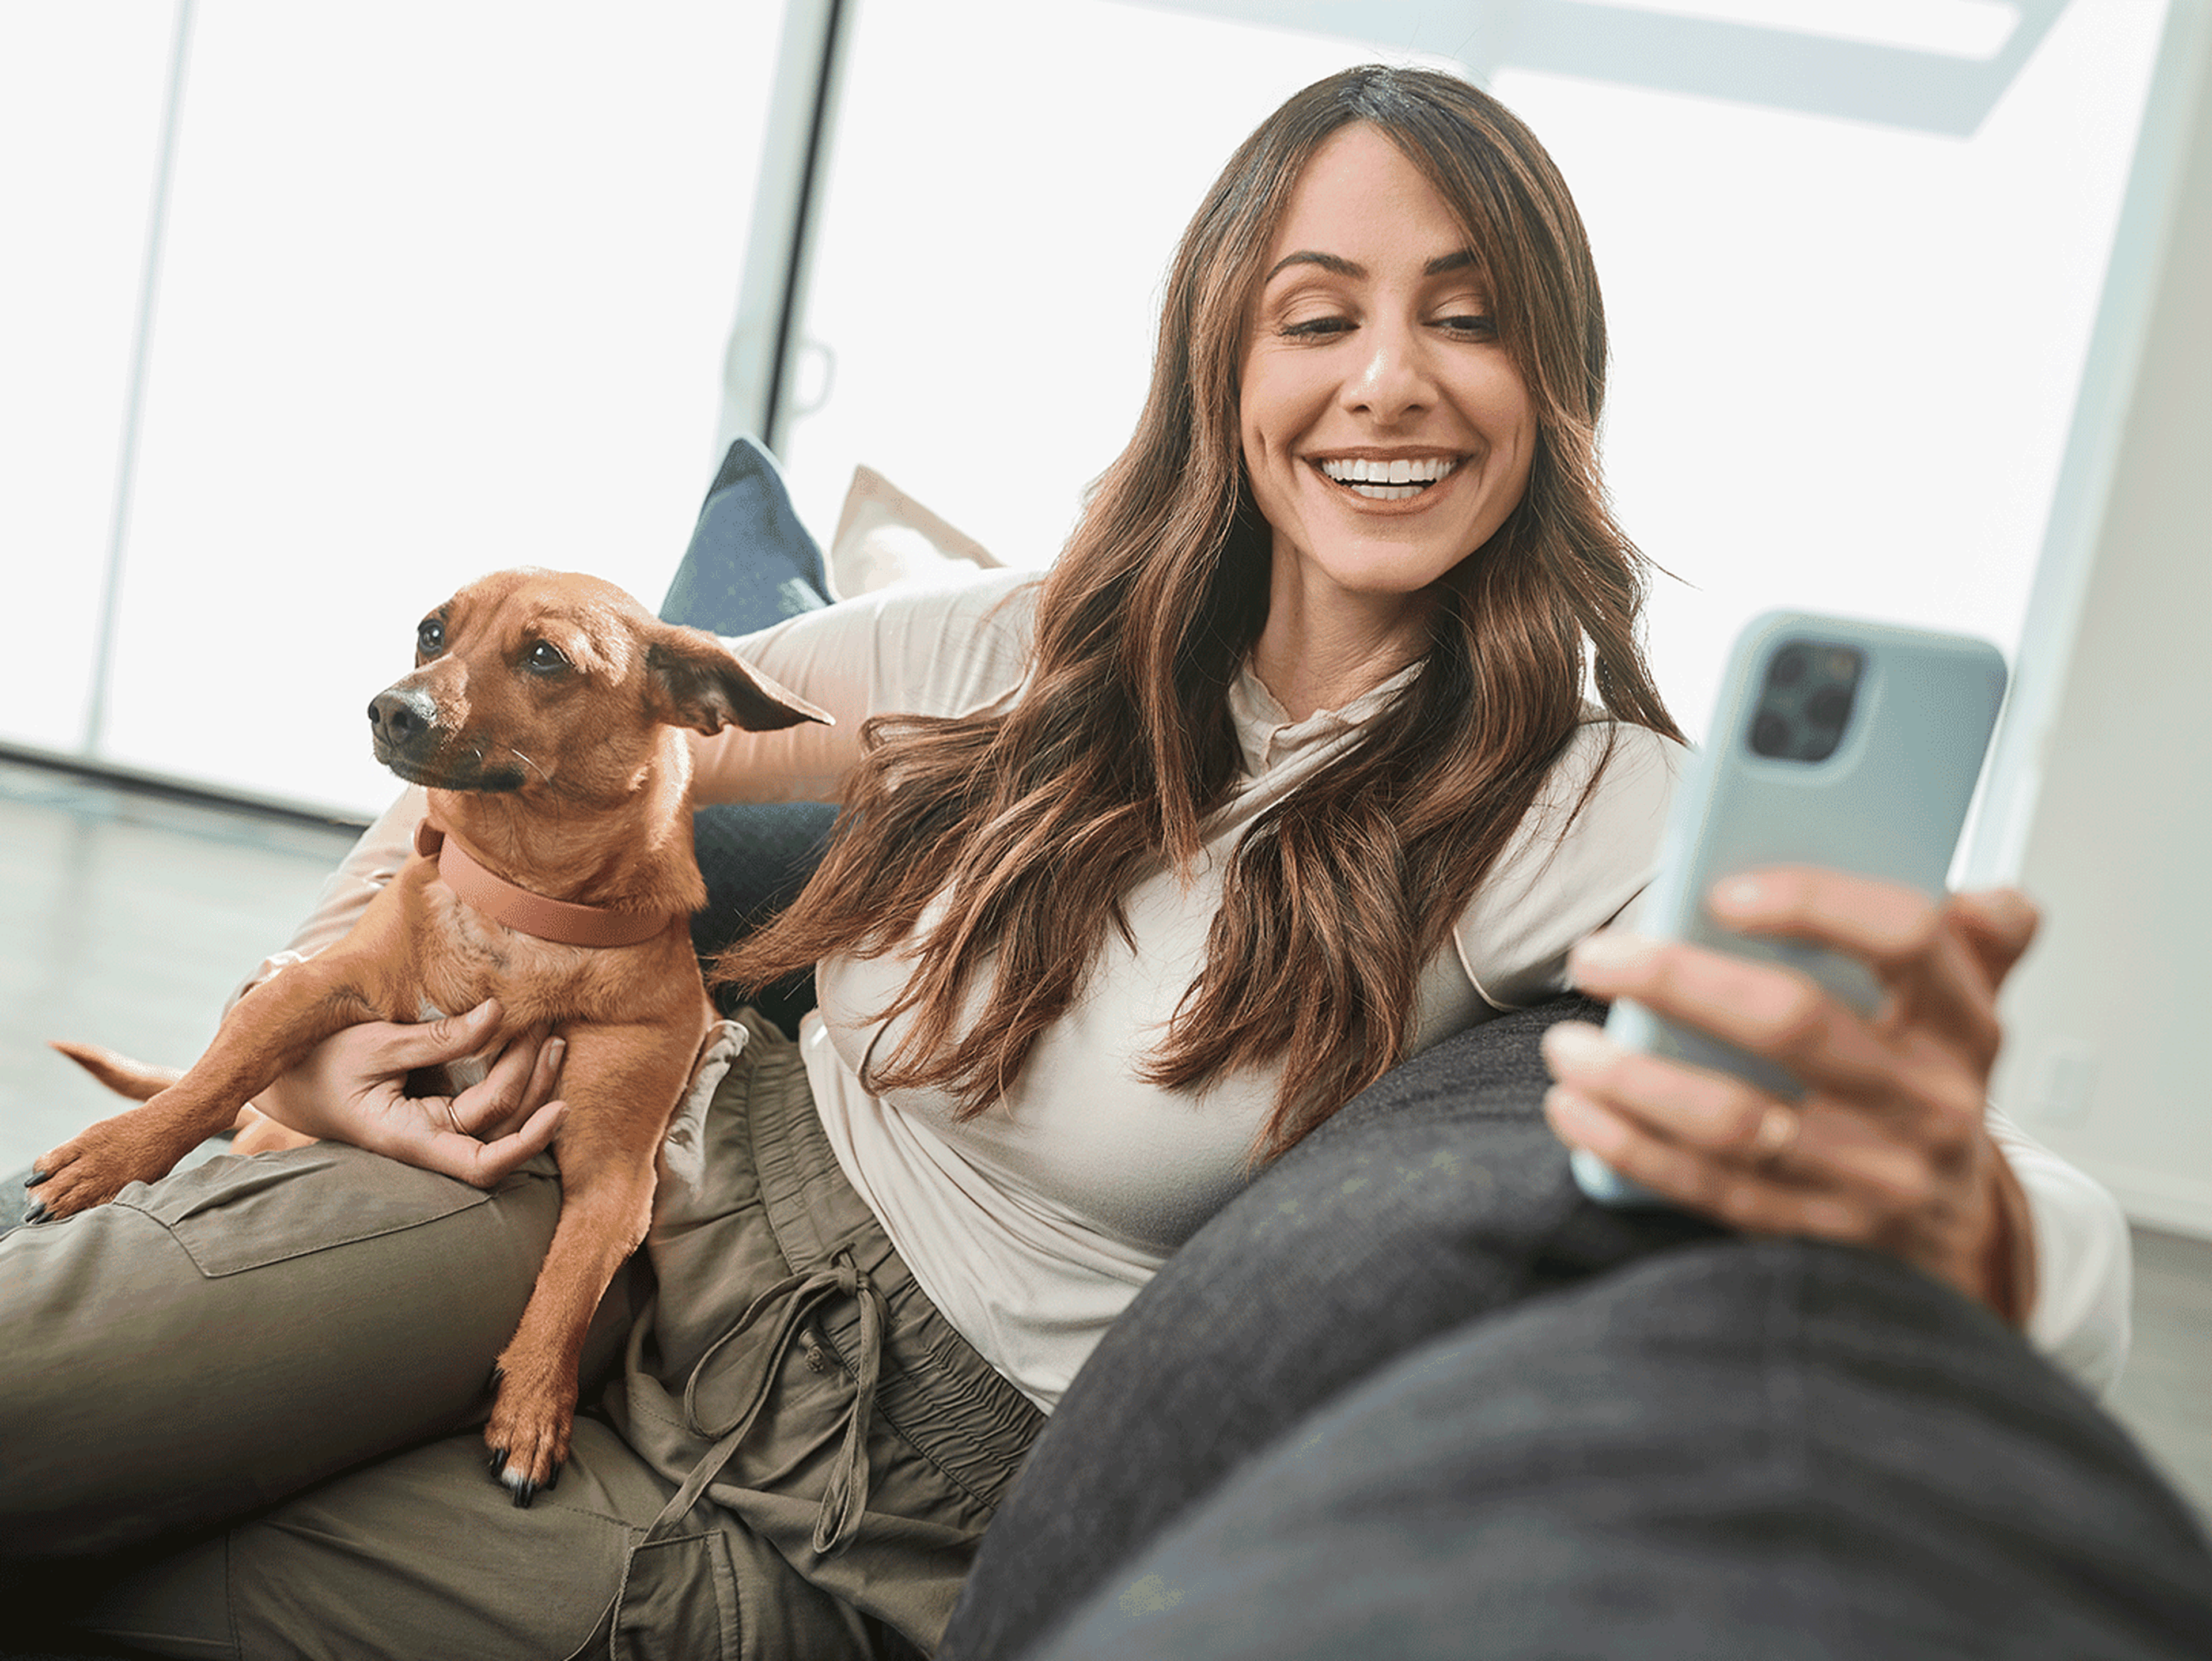 Owner looking at her phone screen with her dog beside her, on the sofa.